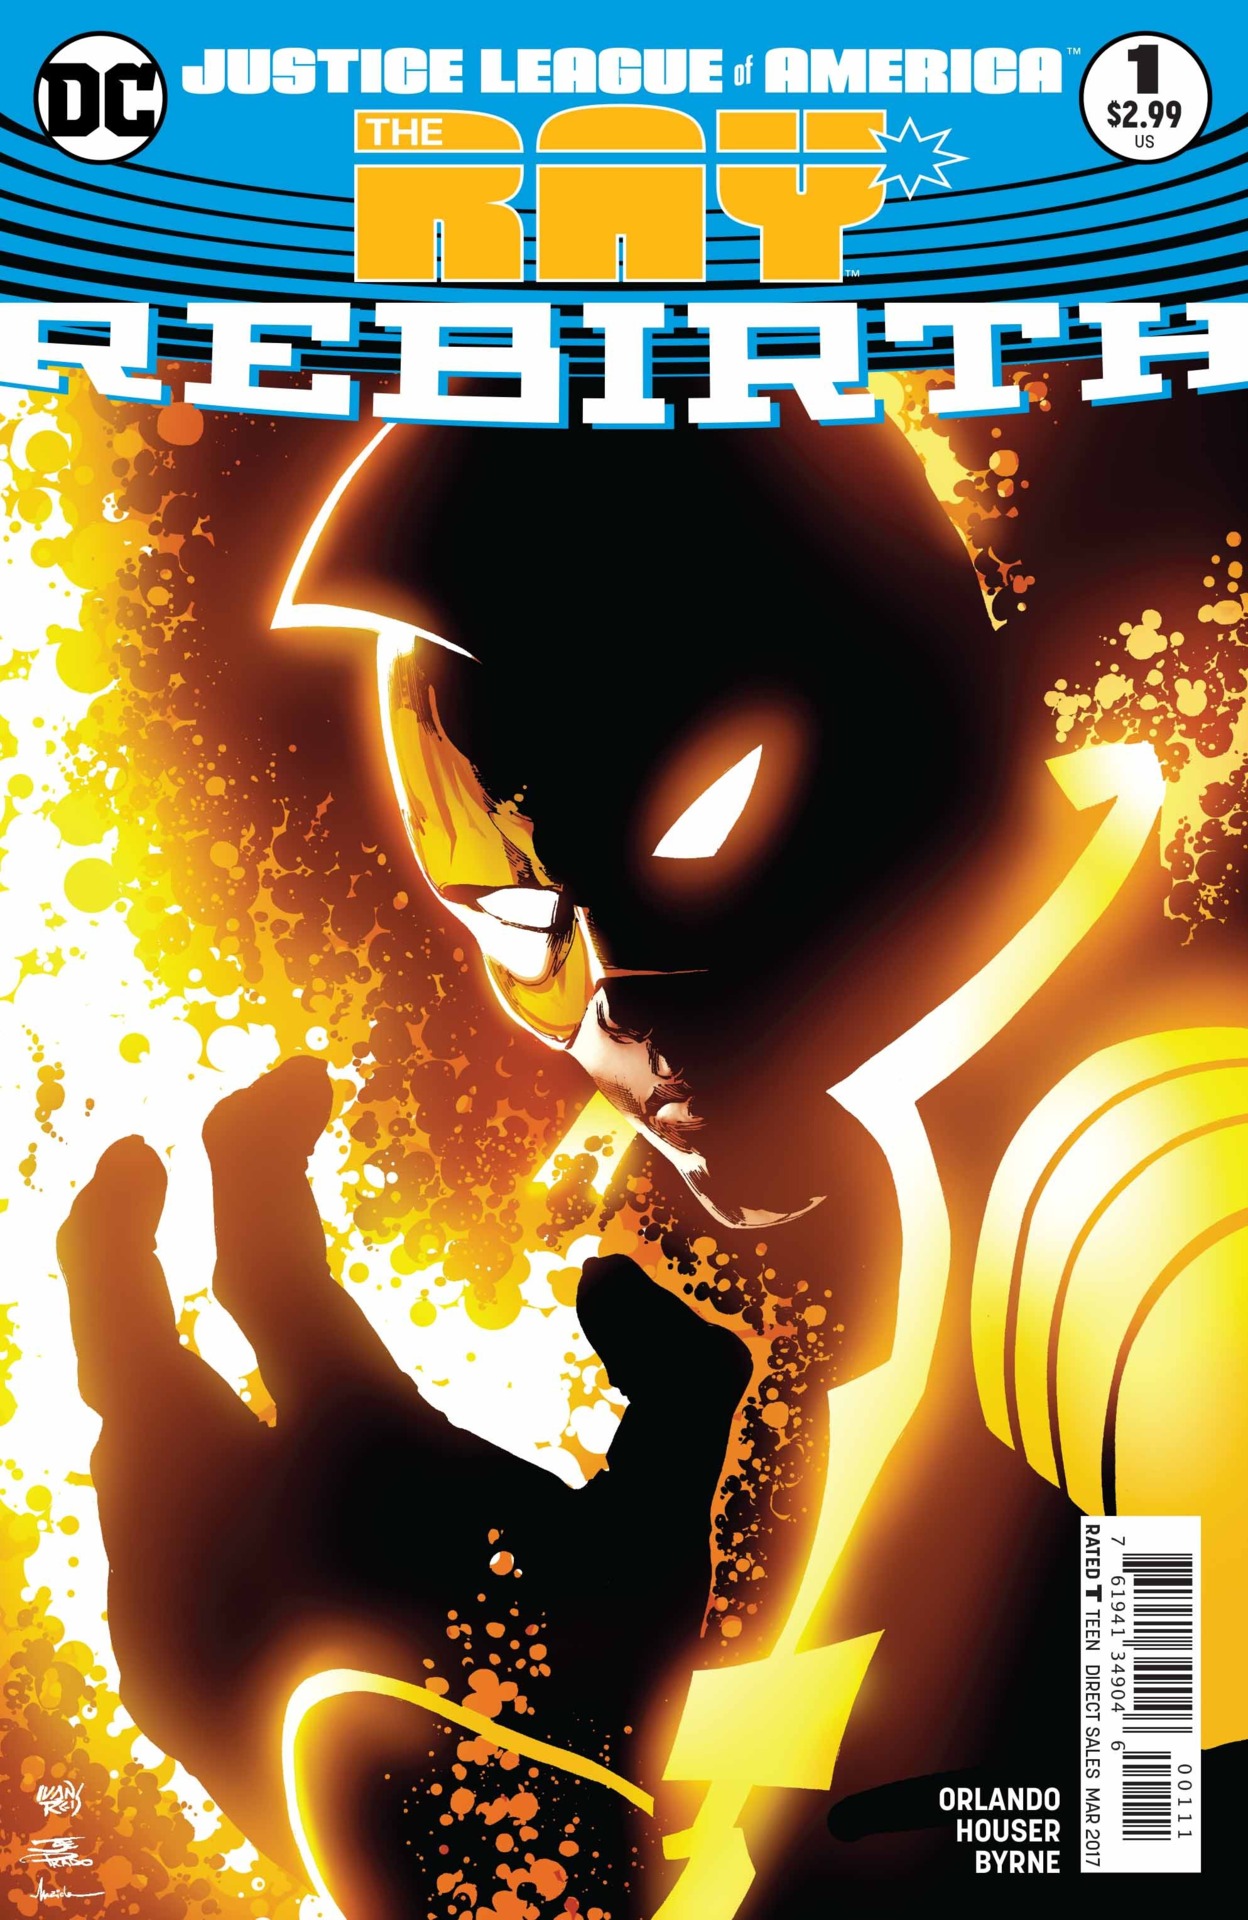 Justice League of America: The Ray Rebirth #1